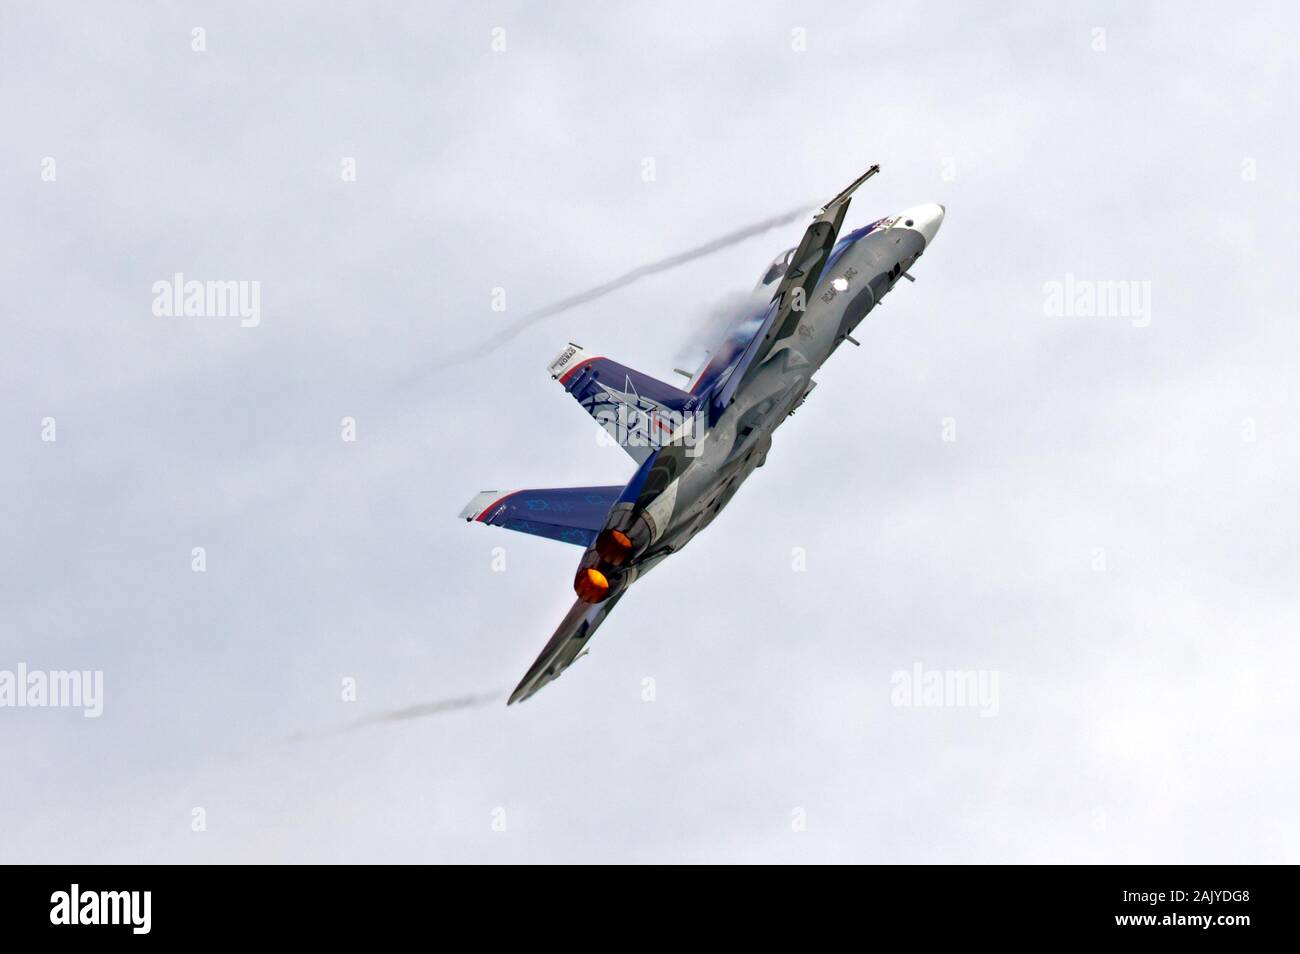 A Canadian Forces McDonnell Douglas CF-18 Hornet Demo team jet as it powers up and away from the spectators at Airshow, London in London, Ontario. Stock Photo